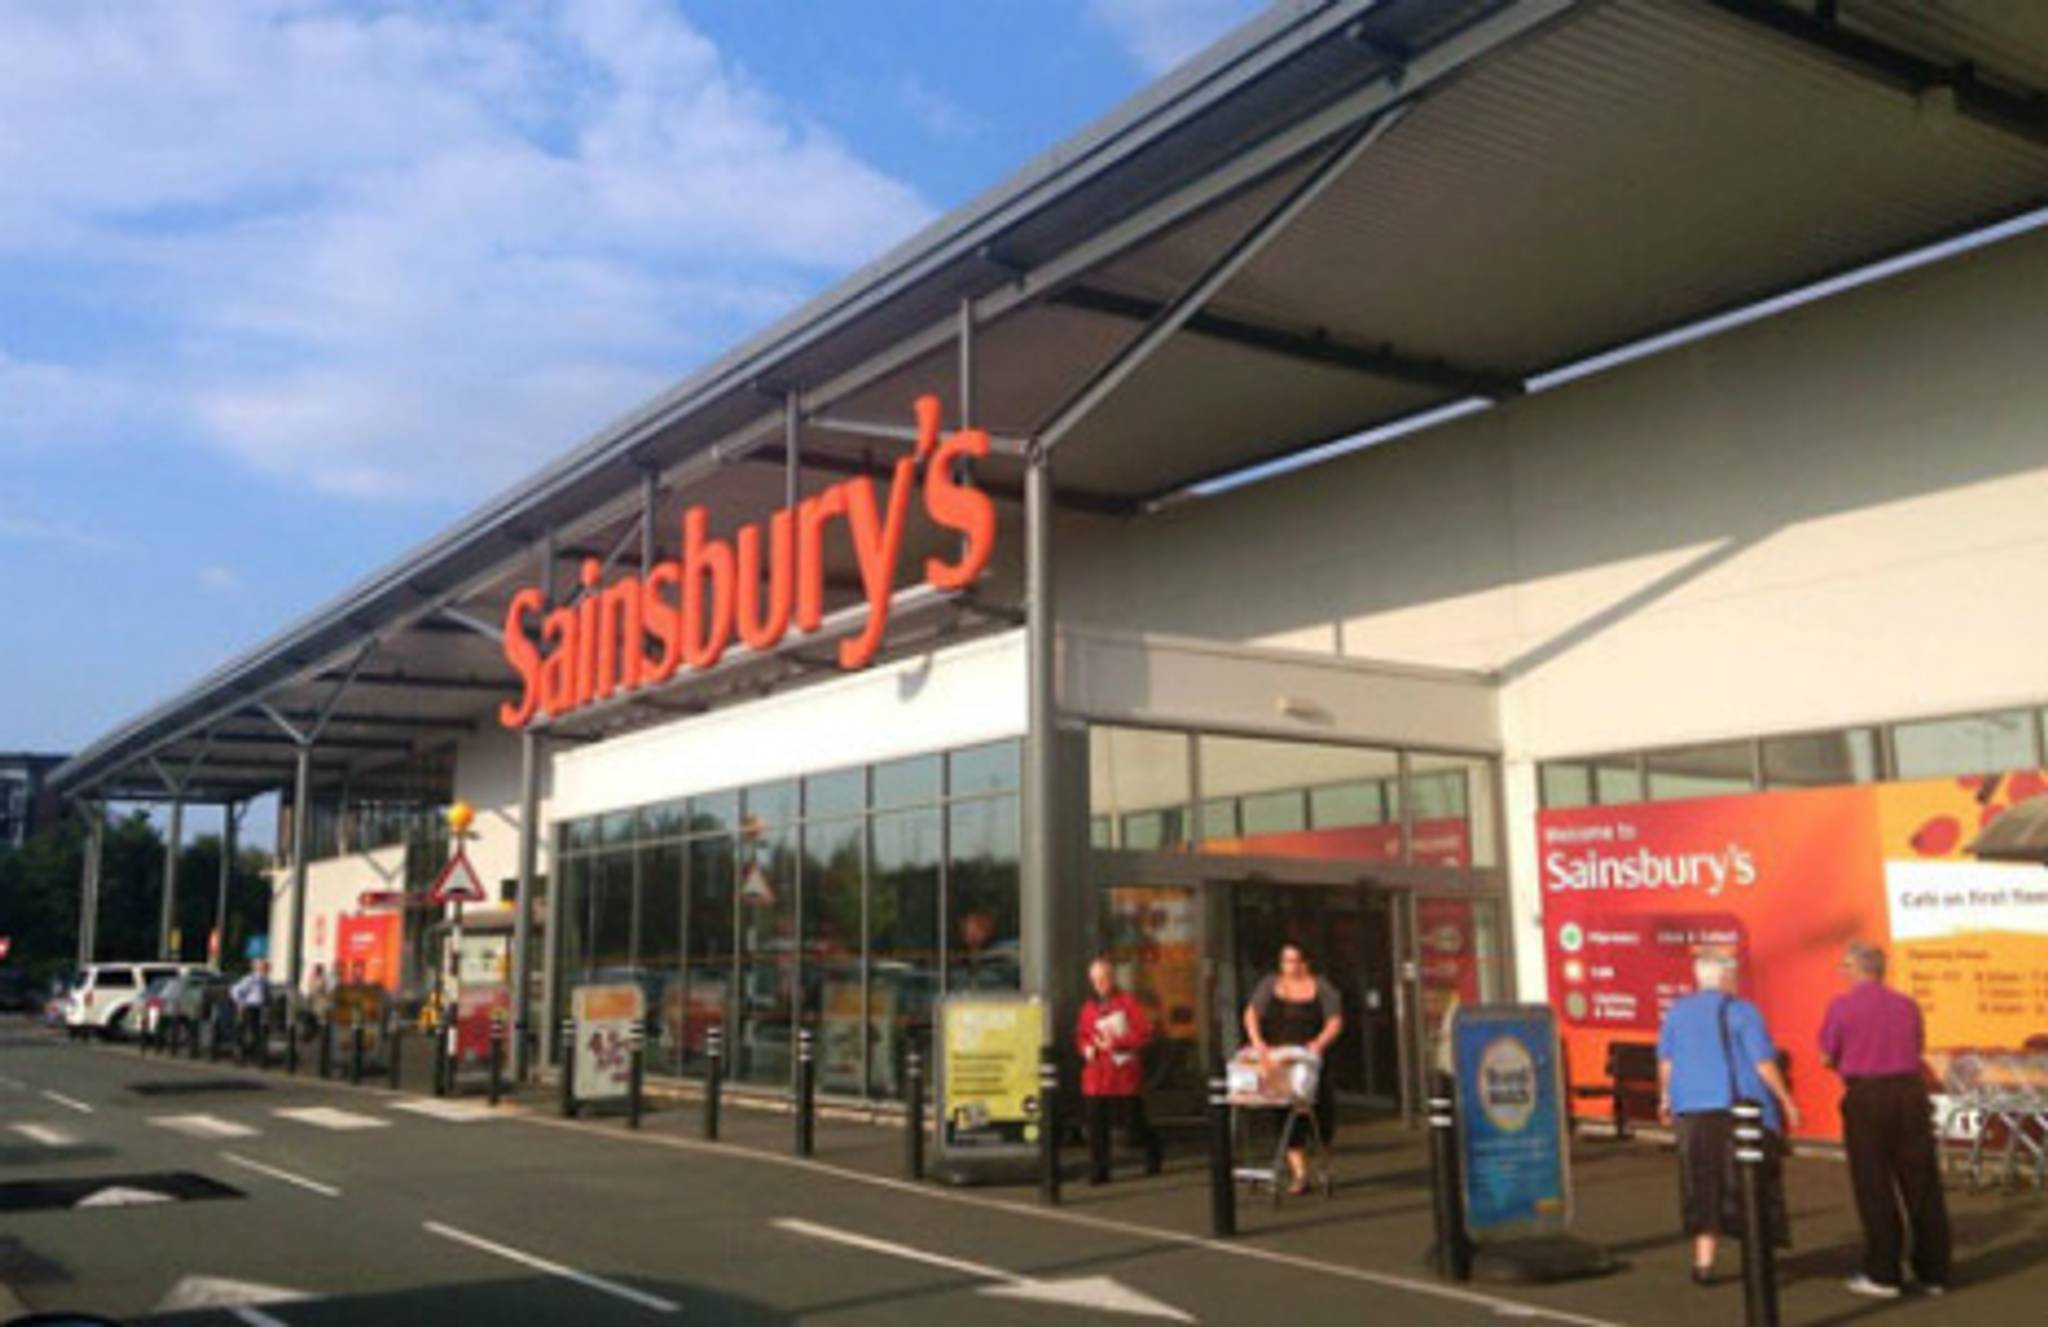 This Sainsbury's store is fuelled by waste